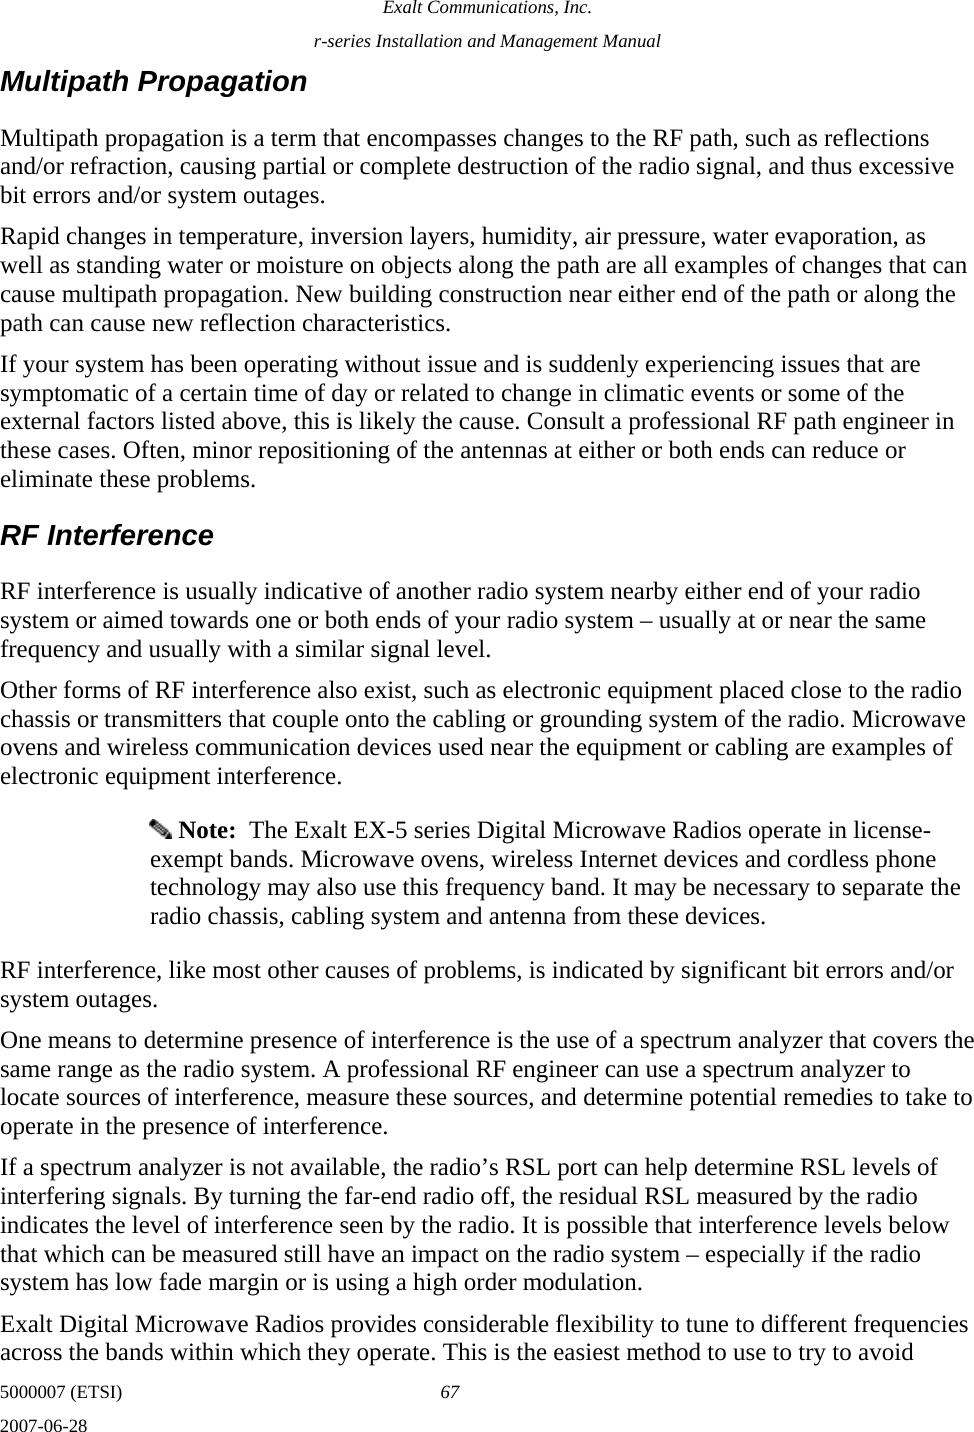 Exalt Communications, Inc. r-series Installation and Management Manual 5000007 (ETSI)  67 2007-06-28  Multipath Propagation Multipath propagation is a term that encompasses changes to the RF path, such as reflections and/or refraction, causing partial or complete destruction of the radio signal, and thus excessive bit errors and/or system outages.  Rapid changes in temperature, inversion layers, humidity, air pressure, water evaporation, as well as standing water or moisture on objects along the path are all examples of changes that can cause multipath propagation. New building construction near either end of the path or along the path can cause new reflection characteristics. If your system has been operating without issue and is suddenly experiencing issues that are symptomatic of a certain time of day or related to change in climatic events or some of the external factors listed above, this is likely the cause. Consult a professional RF path engineer in these cases. Often, minor repositioning of the antennas at either or both ends can reduce or eliminate these problems. RF Interference RF interference is usually indicative of another radio system nearby either end of your radio system or aimed towards one or both ends of your radio system – usually at or near the same frequency and usually with a similar signal level. Other forms of RF interference also exist, such as electronic equipment placed close to the radio chassis or transmitters that couple onto the cabling or grounding system of the radio. Microwave ovens and wireless communication devices used near the equipment or cabling are examples of electronic equipment interference.  Note:  The Exalt EX-5 series Digital Microwave Radios operate in license-exempt bands. Microwave ovens, wireless Internet devices and cordless phone technology may also use this frequency band. It may be necessary to separate the radio chassis, cabling system and antenna from these devices. RF interference, like most other causes of problems, is indicated by significant bit errors and/or system outages. One means to determine presence of interference is the use of a spectrum analyzer that covers the same range as the radio system. A professional RF engineer can use a spectrum analyzer to locate sources of interference, measure these sources, and determine potential remedies to take to operate in the presence of interference. If a spectrum analyzer is not available, the radio’s RSL port can help determine RSL levels of interfering signals. By turning the far-end radio off, the residual RSL measured by the radio indicates the level of interference seen by the radio. It is possible that interference levels below that which can be measured still have an impact on the radio system – especially if the radio system has low fade margin or is using a high order modulation.  Exalt Digital Microwave Radios provides considerable flexibility to tune to different frequencies across the bands within which they operate. This is the easiest method to use to try to avoid 